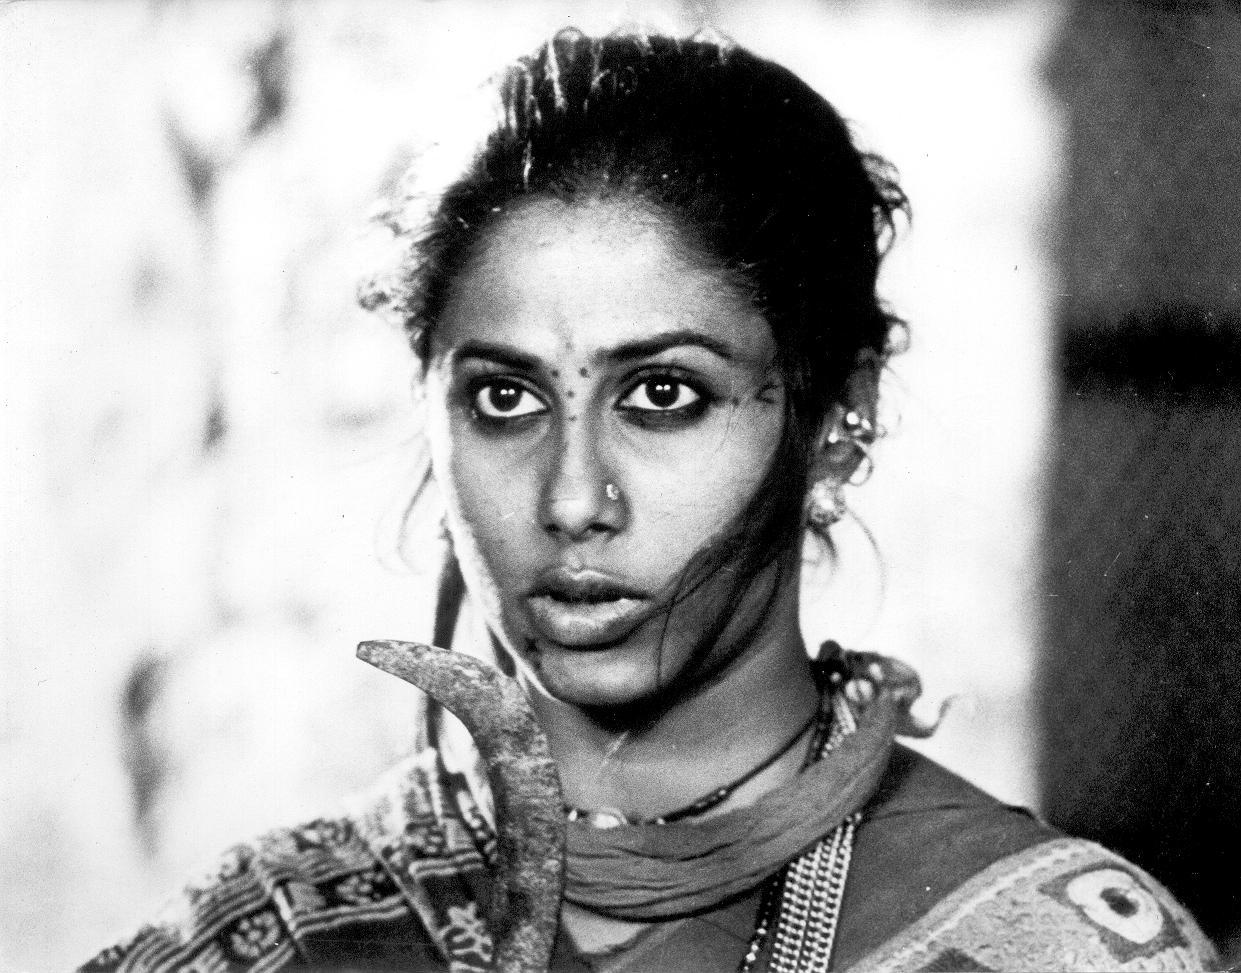 Born on October 17, 1955, Smita Patil is regarded as one of the finest actors in Hindi and Marathi cinema. 